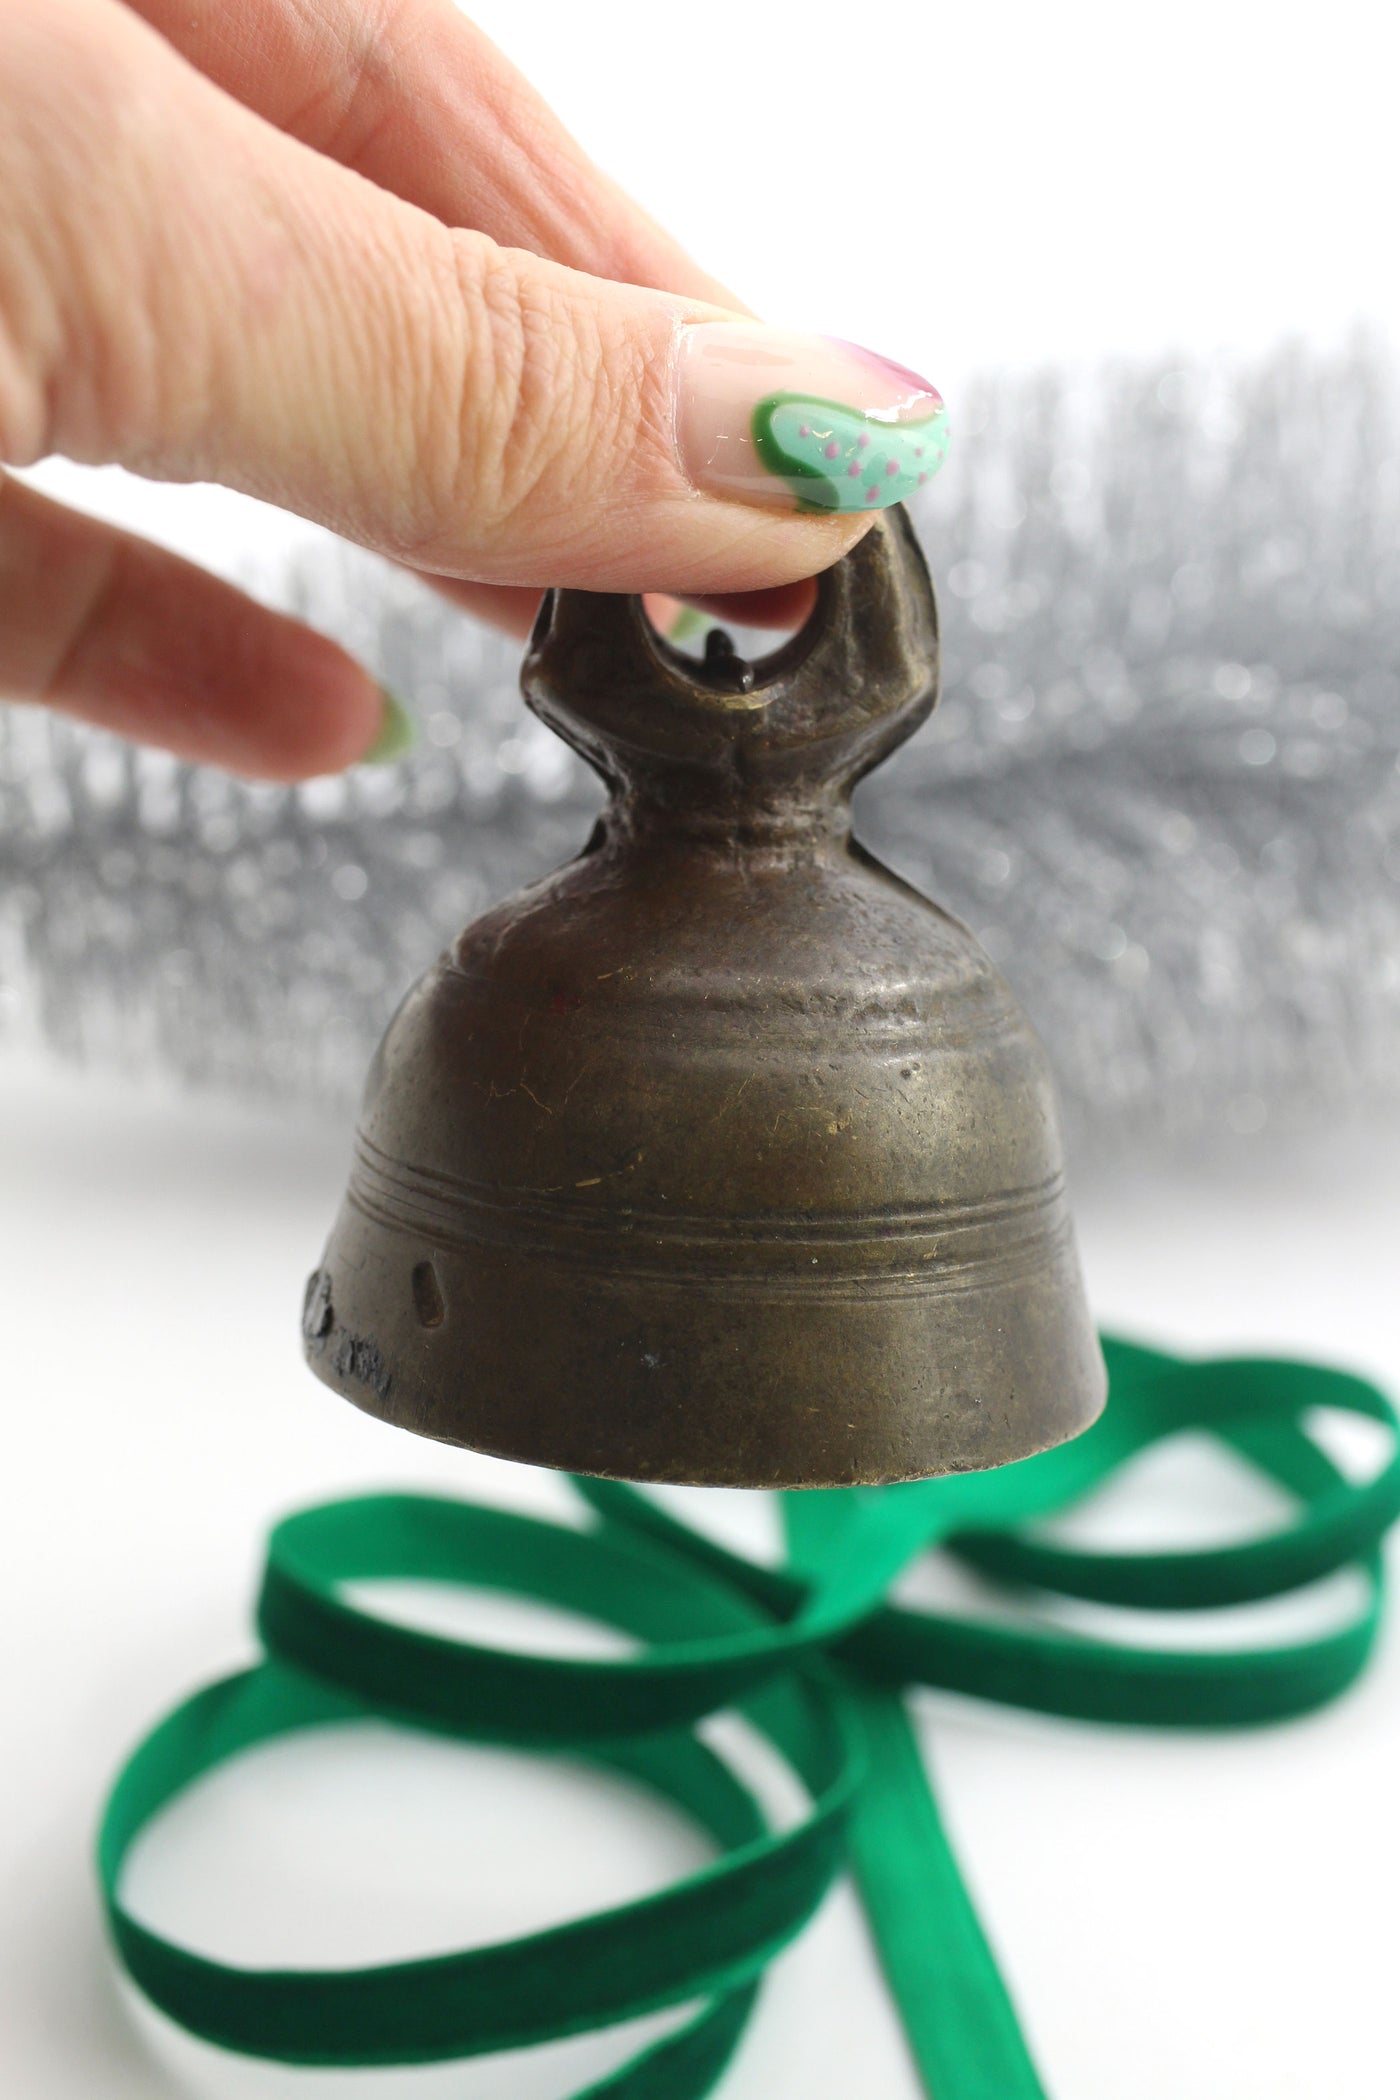 Vintage Brass Indian Bell, Festive Holiday Christmas Decoration